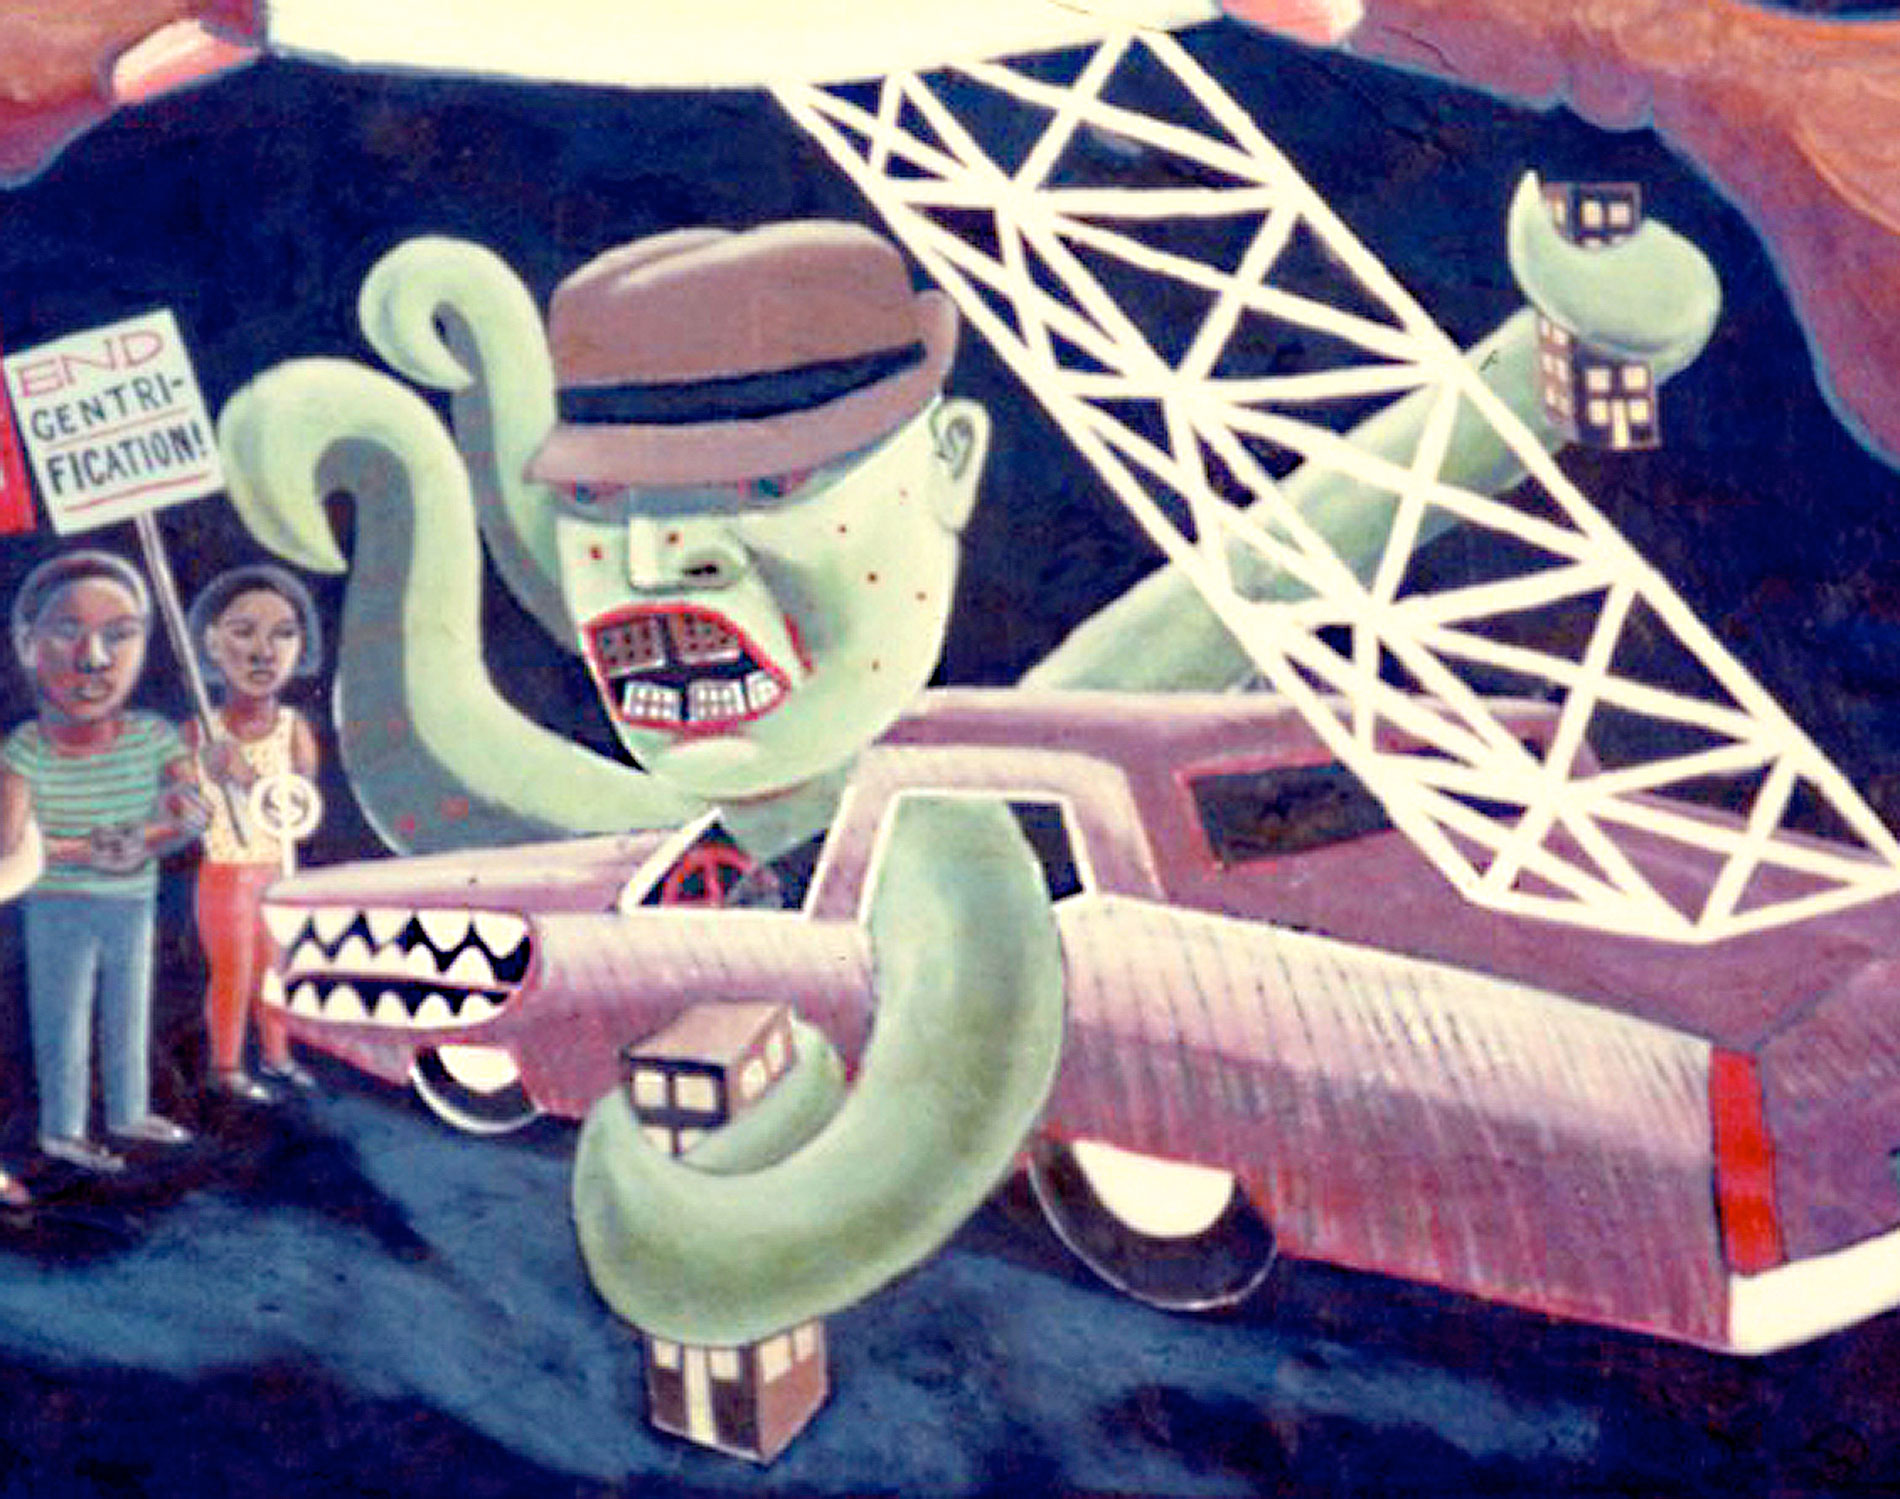   “Octopus Mobster Landlord” by Keith Christensen, detail from  La Lucha Continua  collective mural   Photo © Camille Perrottet    